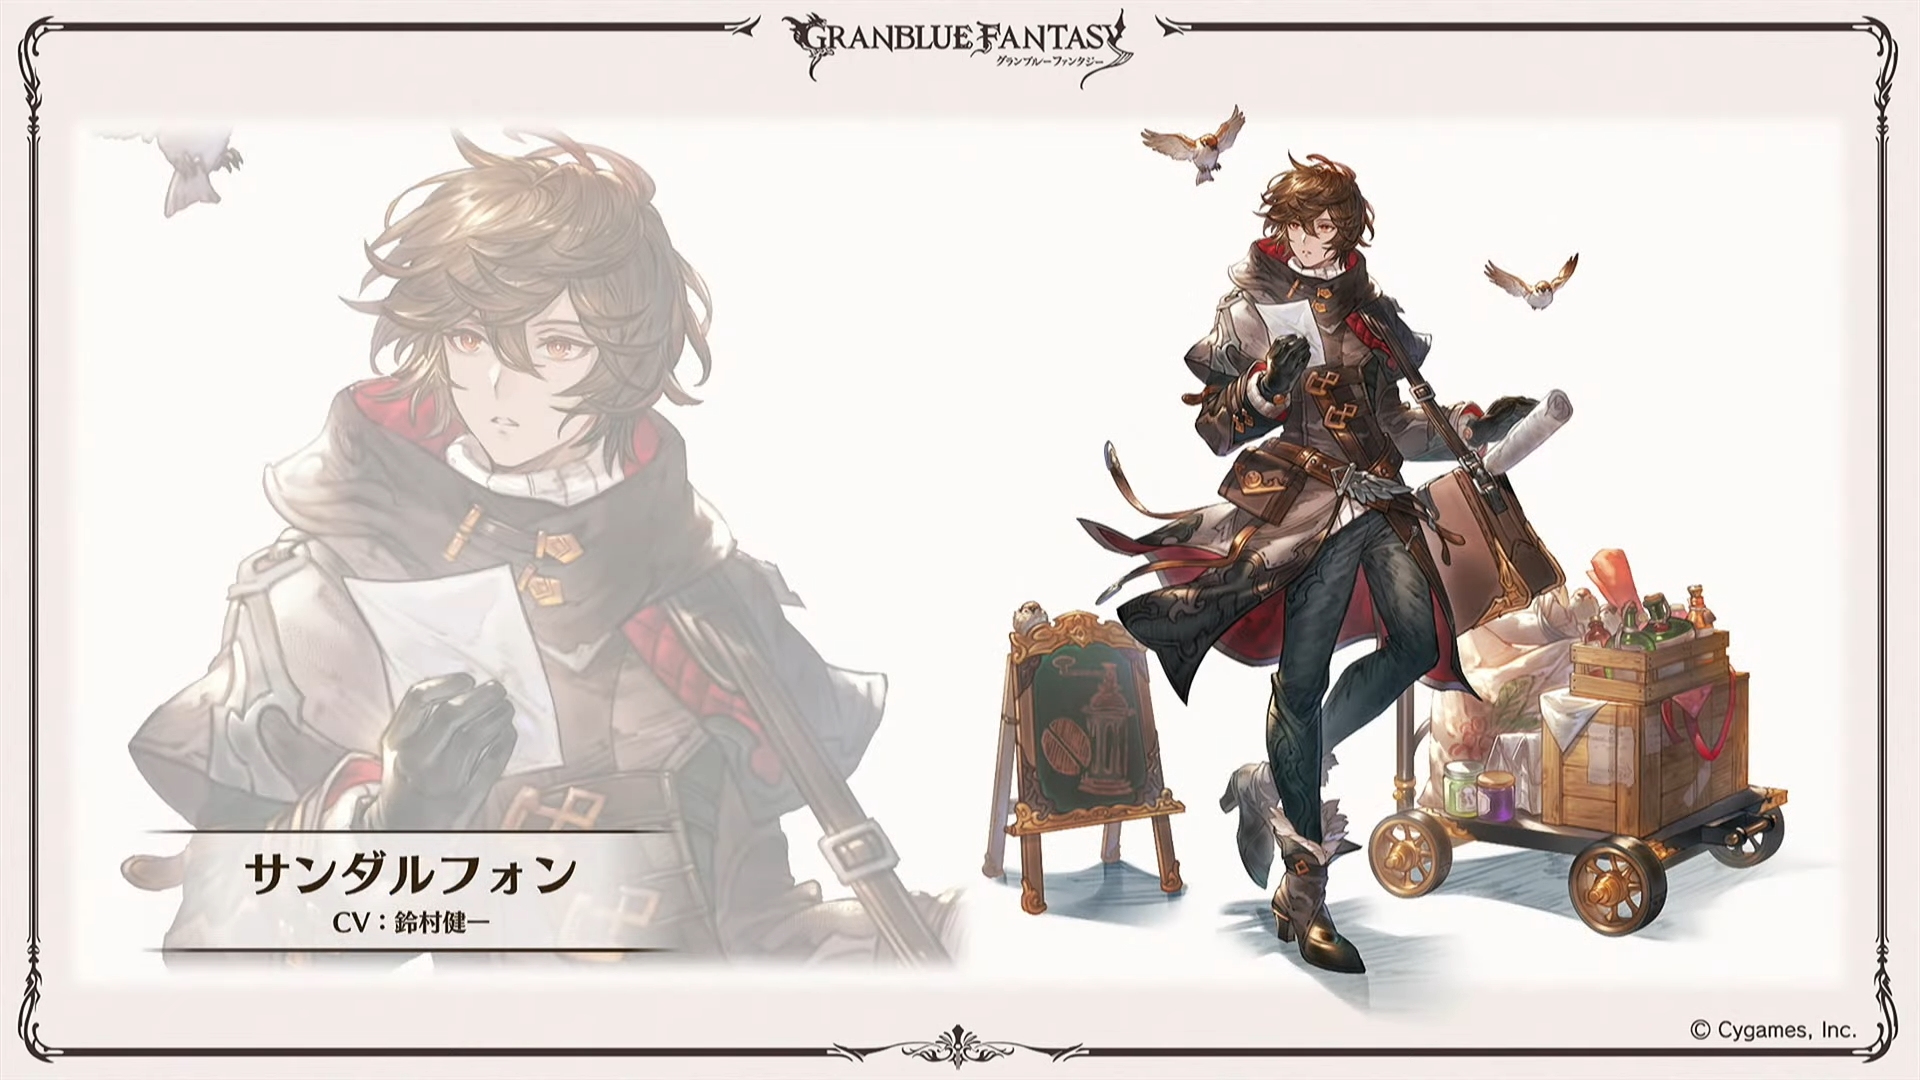 Sandalphon & Sen’s Valentine Edition has been released in advance.  “Granblue Live Broadcast New Year Special Edition” info summary